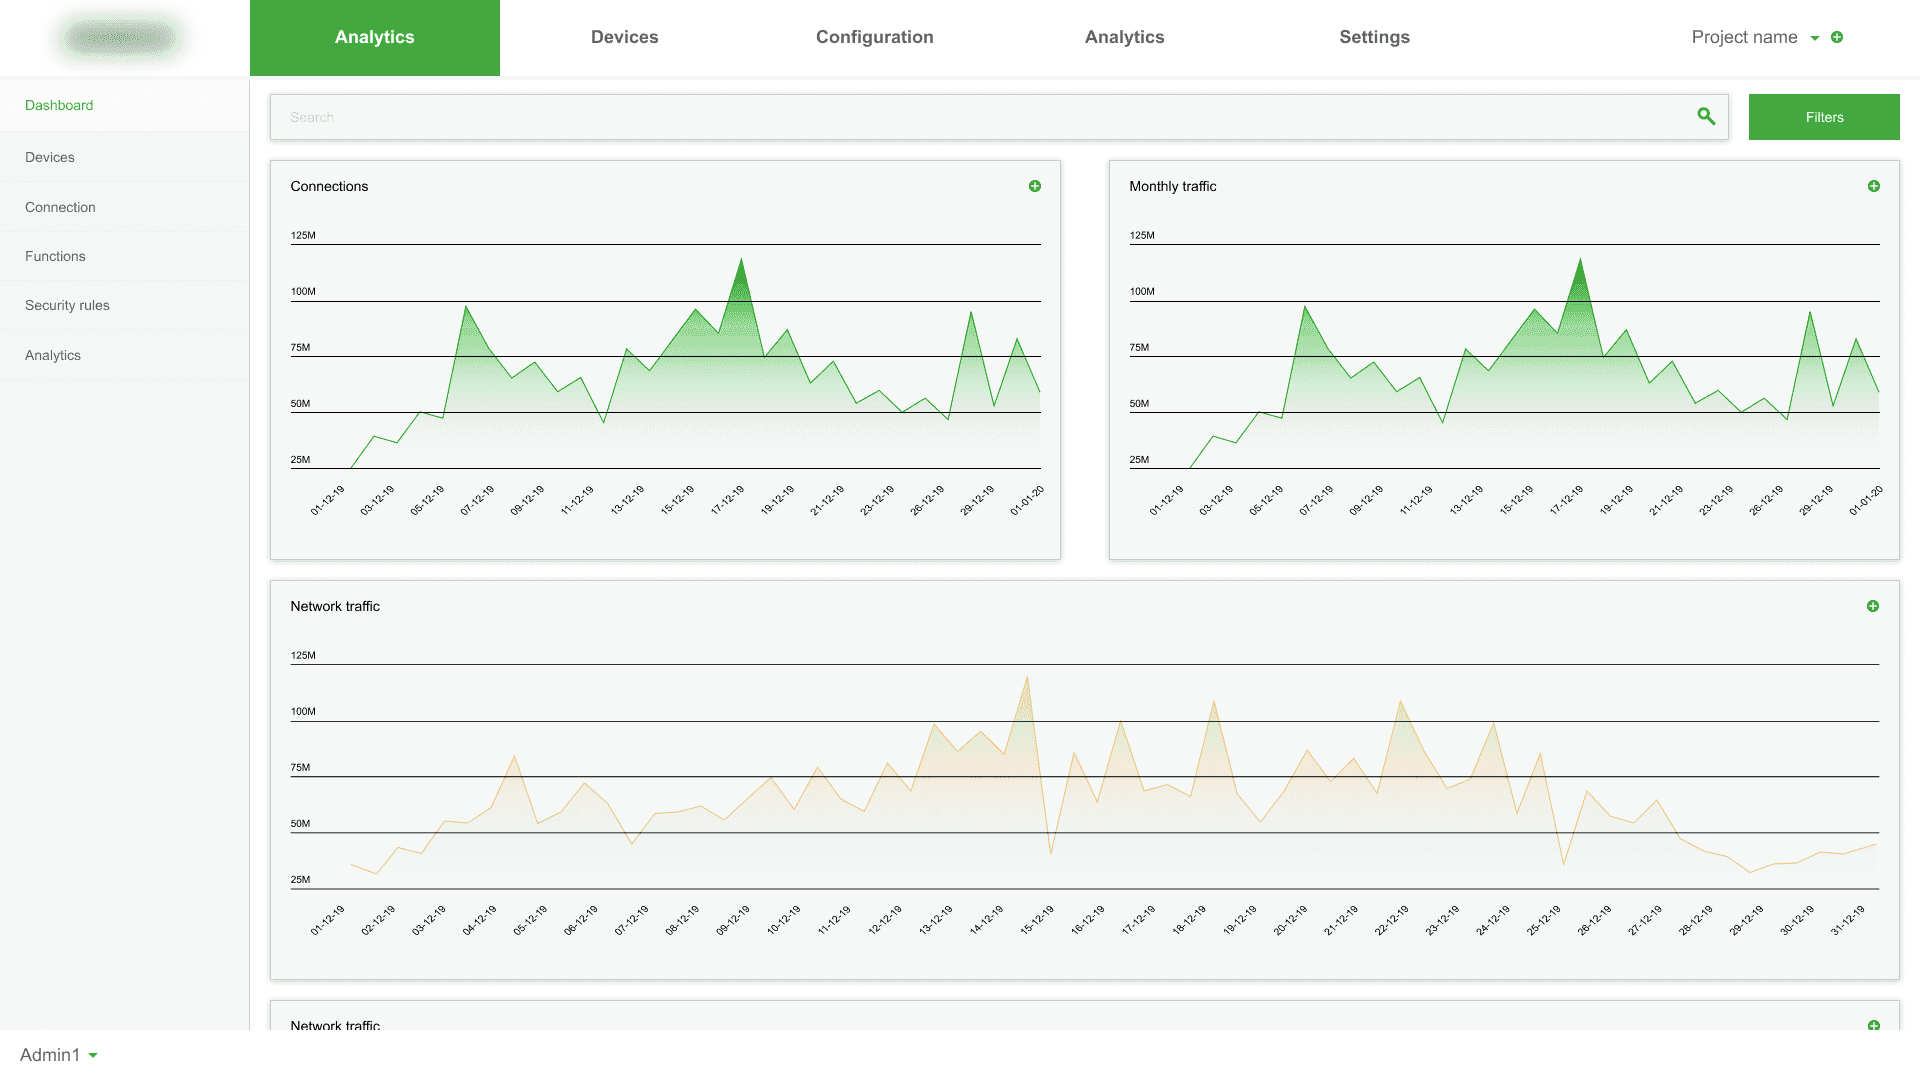 Original dashboard with network stats